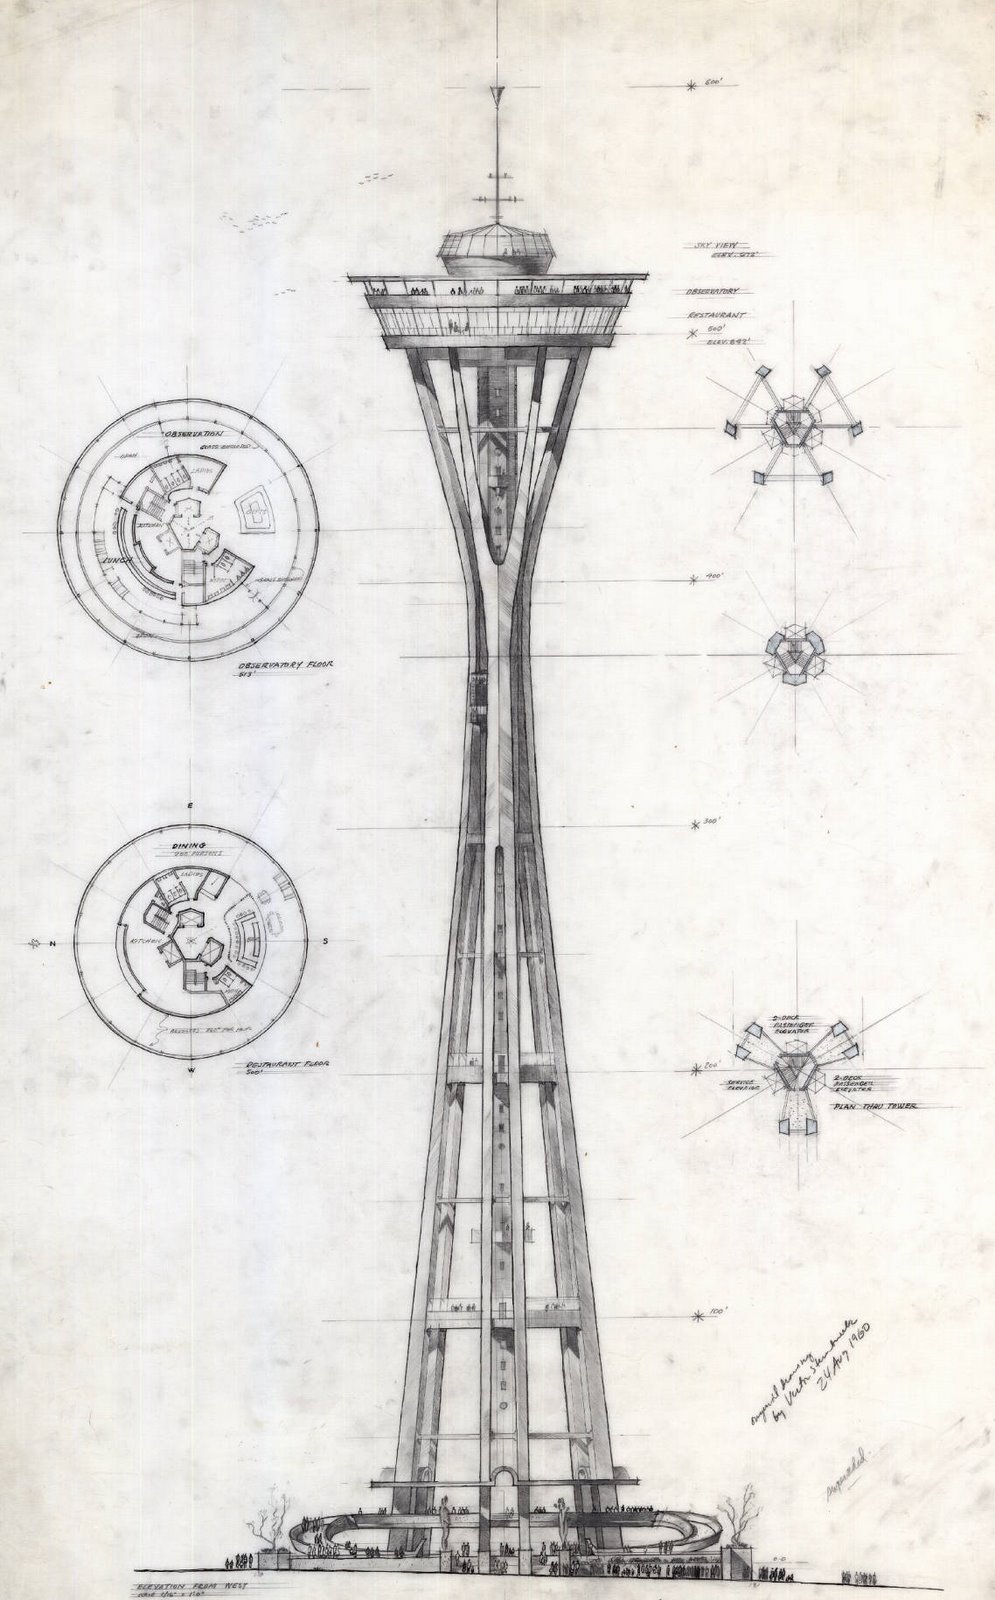 [preliminary+design+of+the+Space+Needle+for+the+1962+Seattle+World's+Fair+Exhibition+Original+drawing+by+Victor+Steinbrueck+24+Aug+1960.jpg]